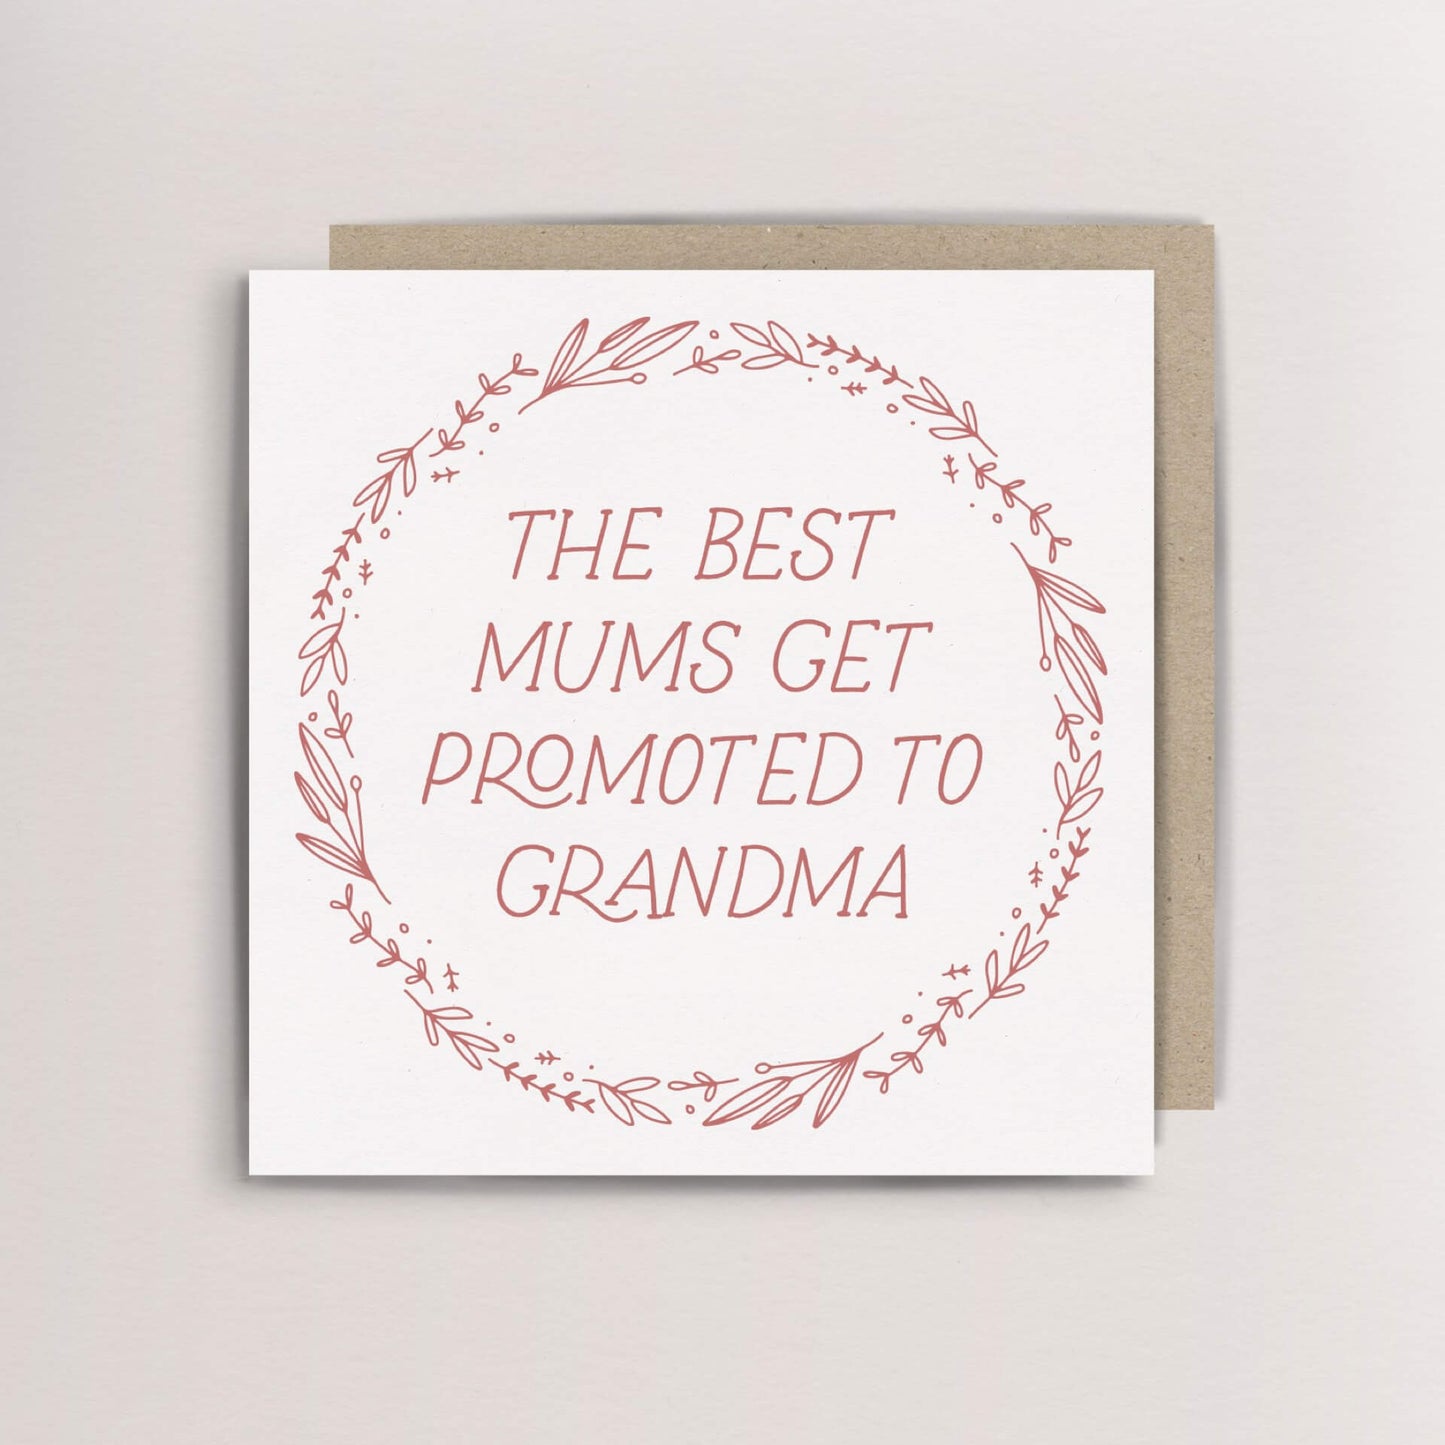 The best mums get promoted to grandma card